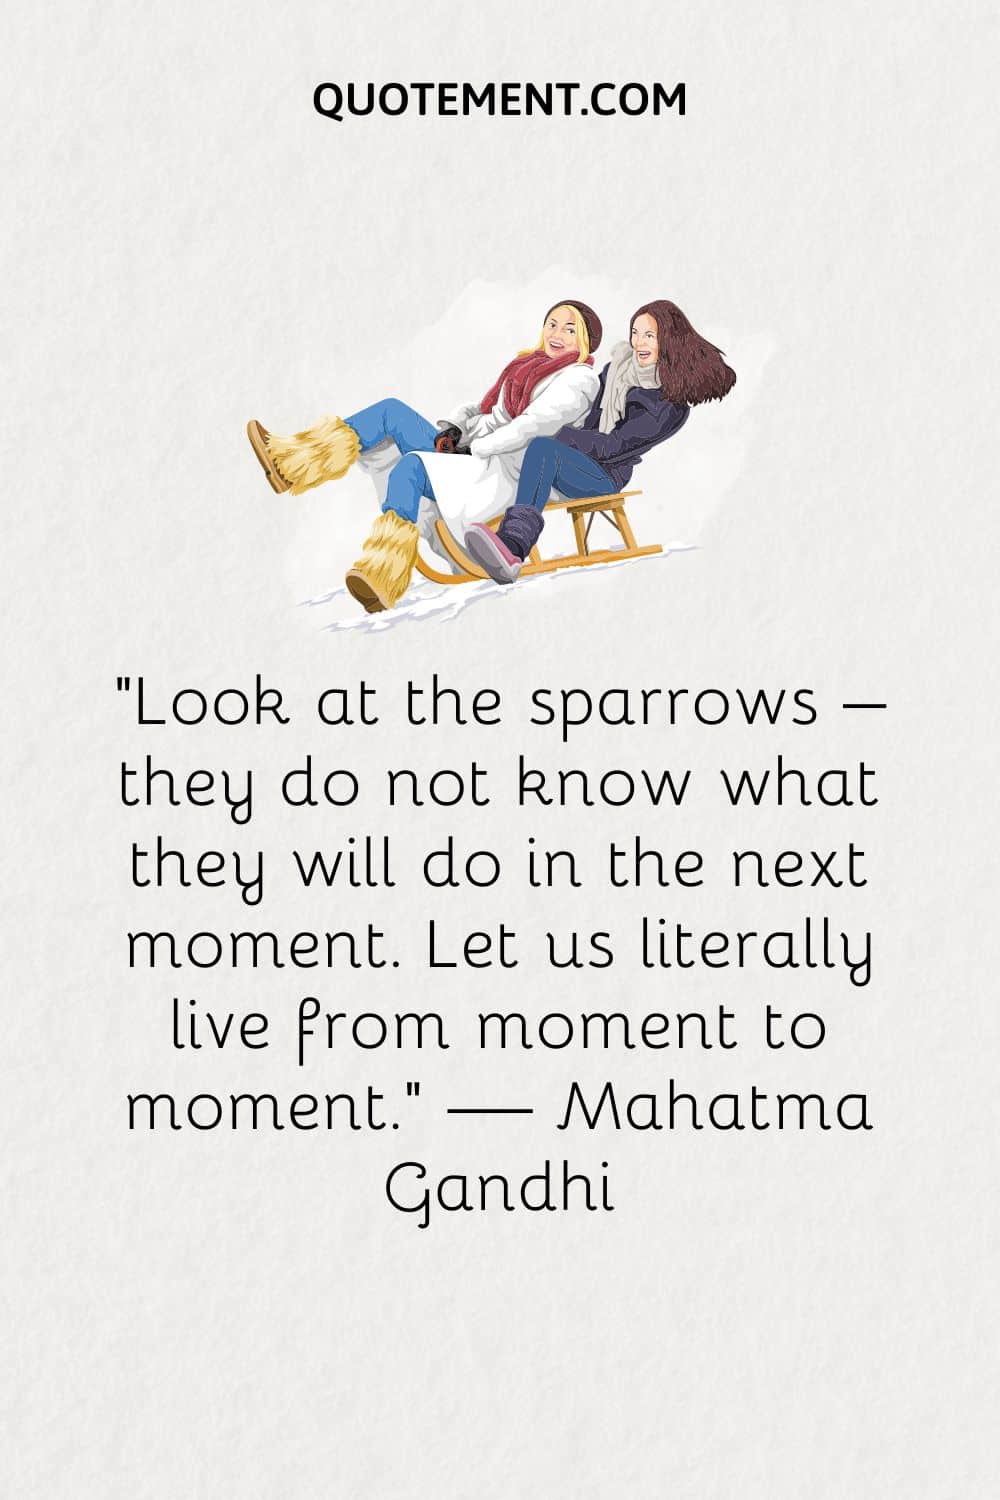 “Look at the sparrows – they do not know what they will do in the next moment. Let us literally live from moment to moment.” — Mahatma Gandhi